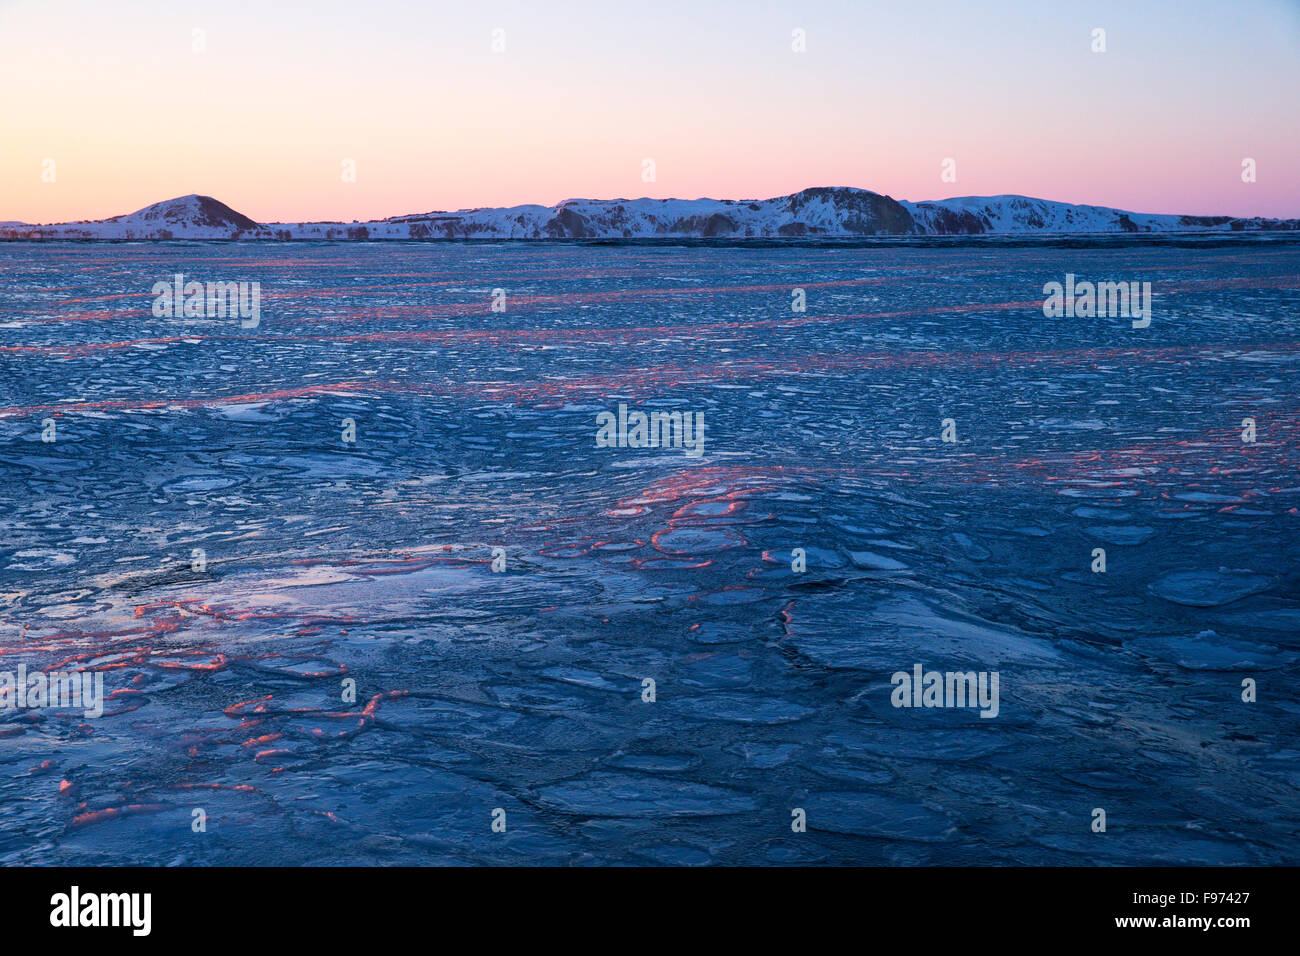 Pancake ice at sunset, Gulf of St. Lawrence, near Îles de la Madeleine (Magdalen Islands), Quebec, Canada. Stock Photo